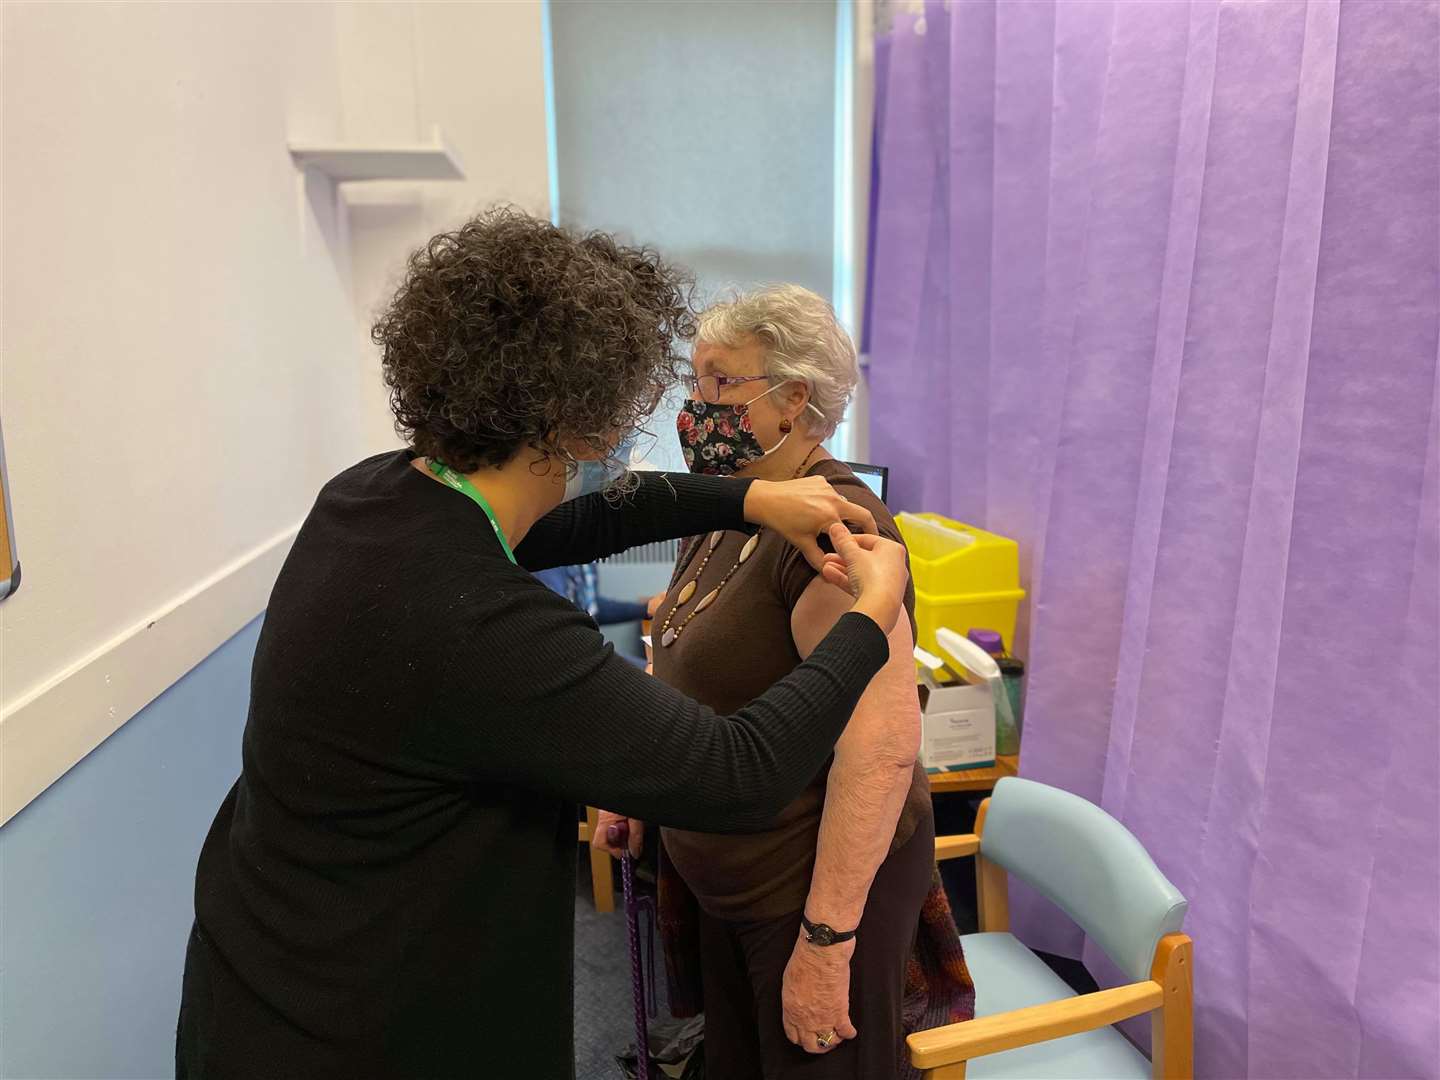 Dr Hilary Audsley, GP at The Chestnuts Surgery in Sittingbourne, giving patient Rowena Mount her first dose of the coronavirus vaccine